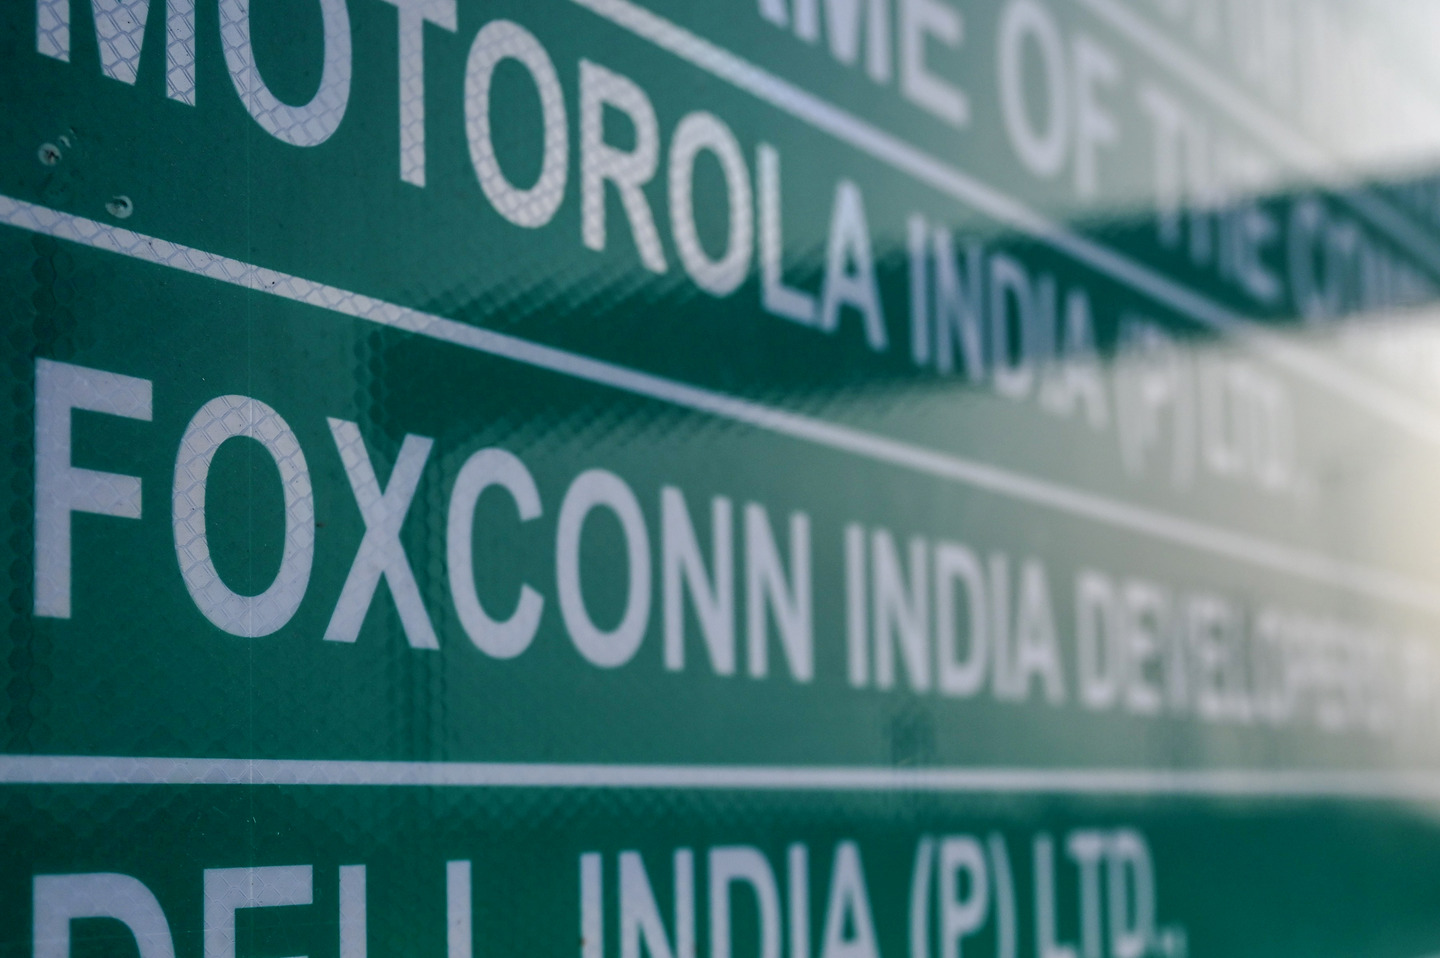 Foxconn has had mixed fortunes in India.